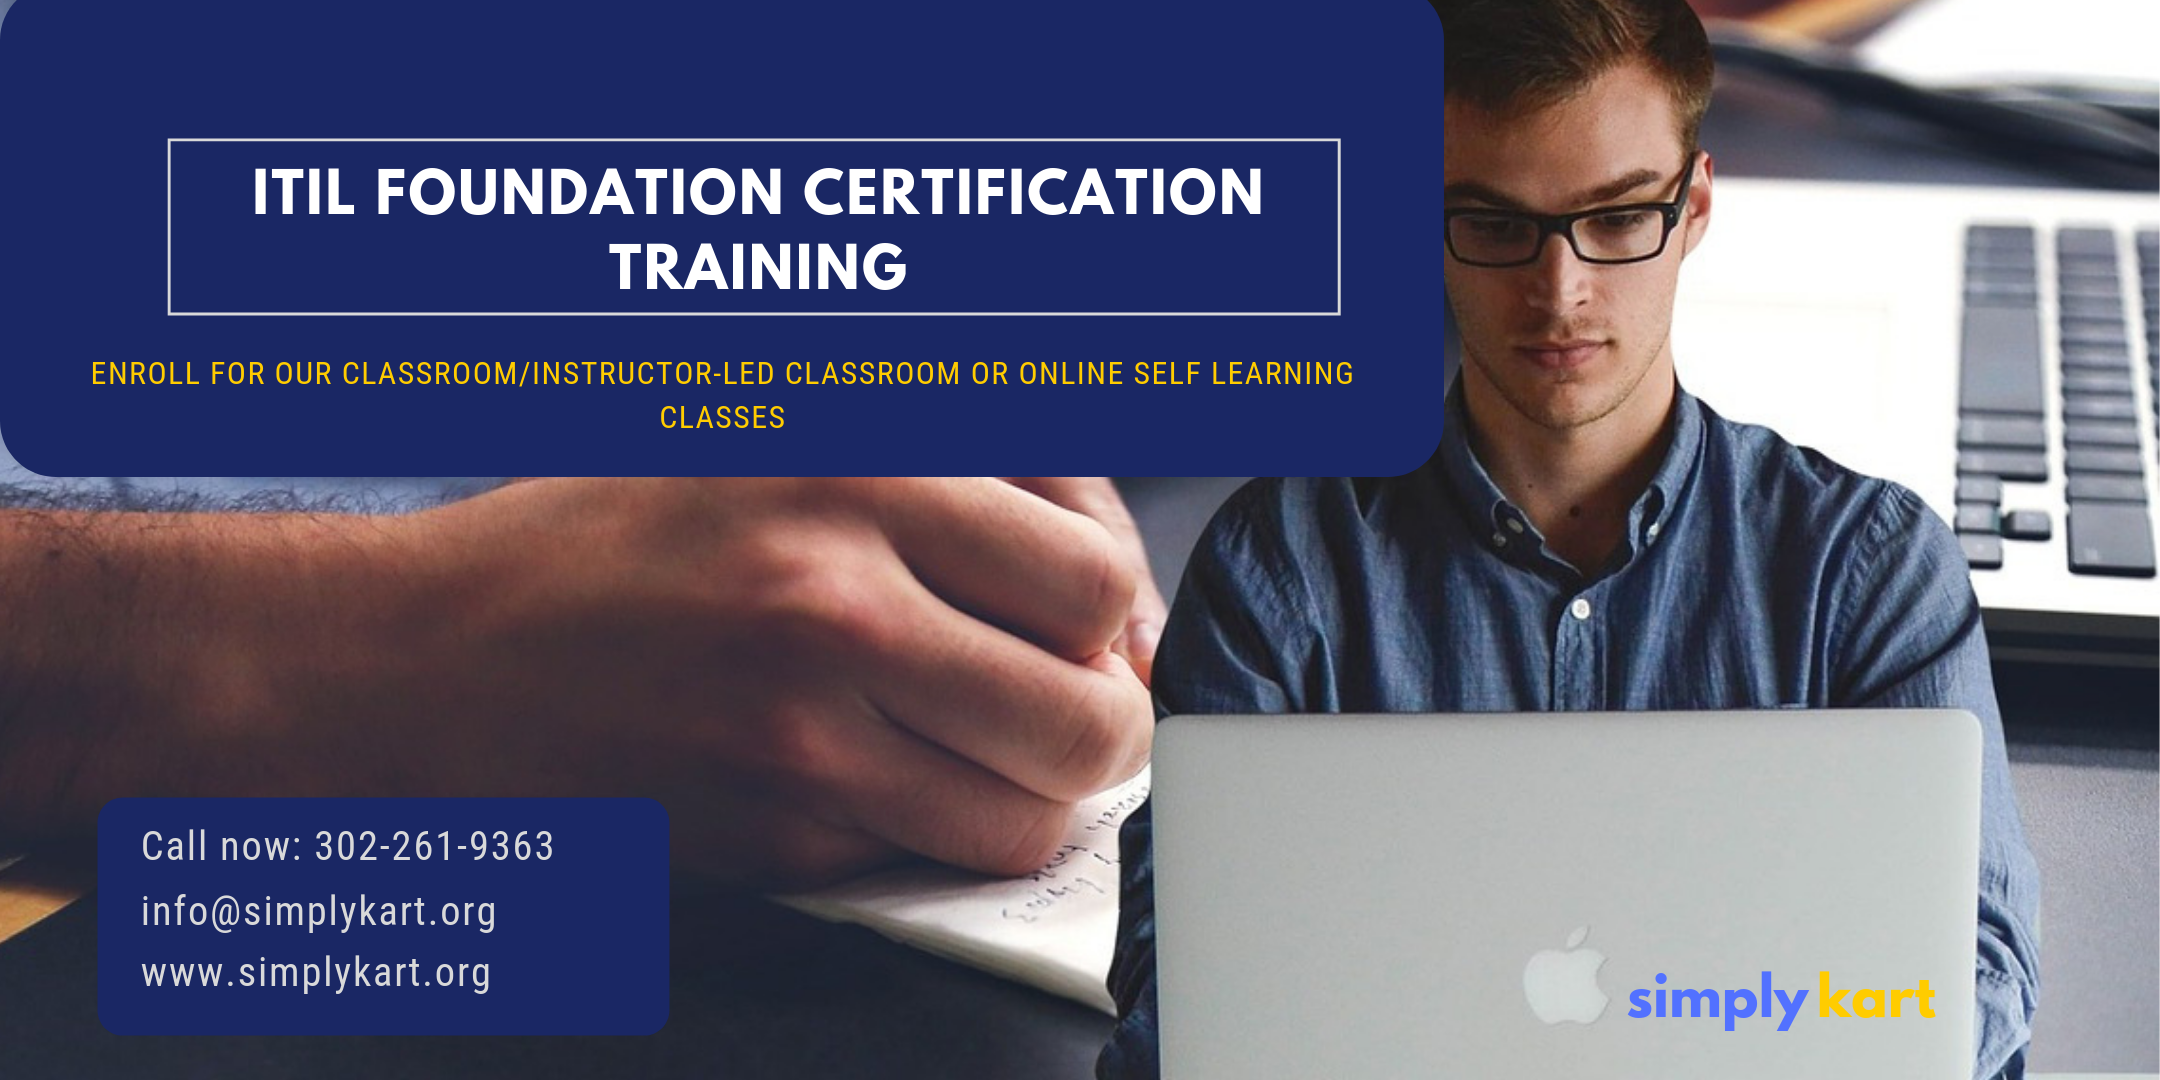 ITIL Certification Training in Penticton, BC